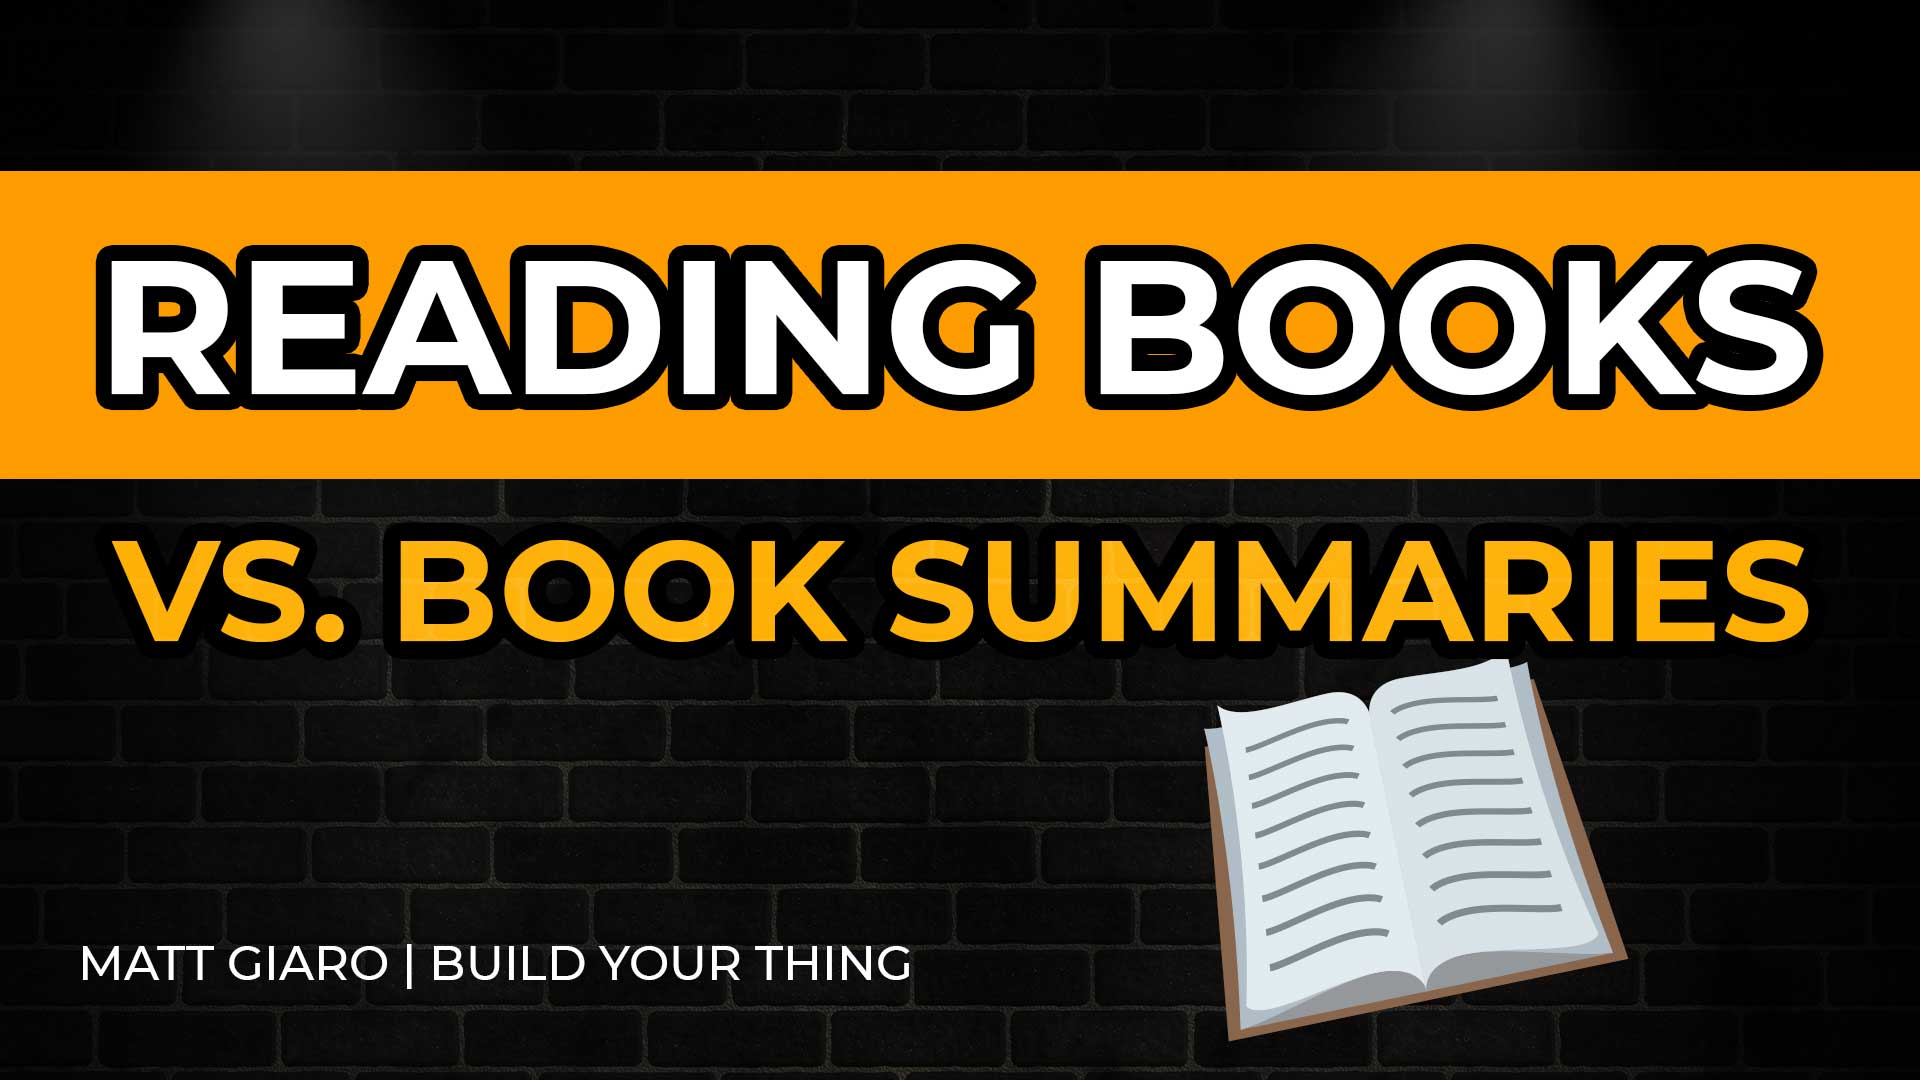 Should You Read Books or Book Summaries?